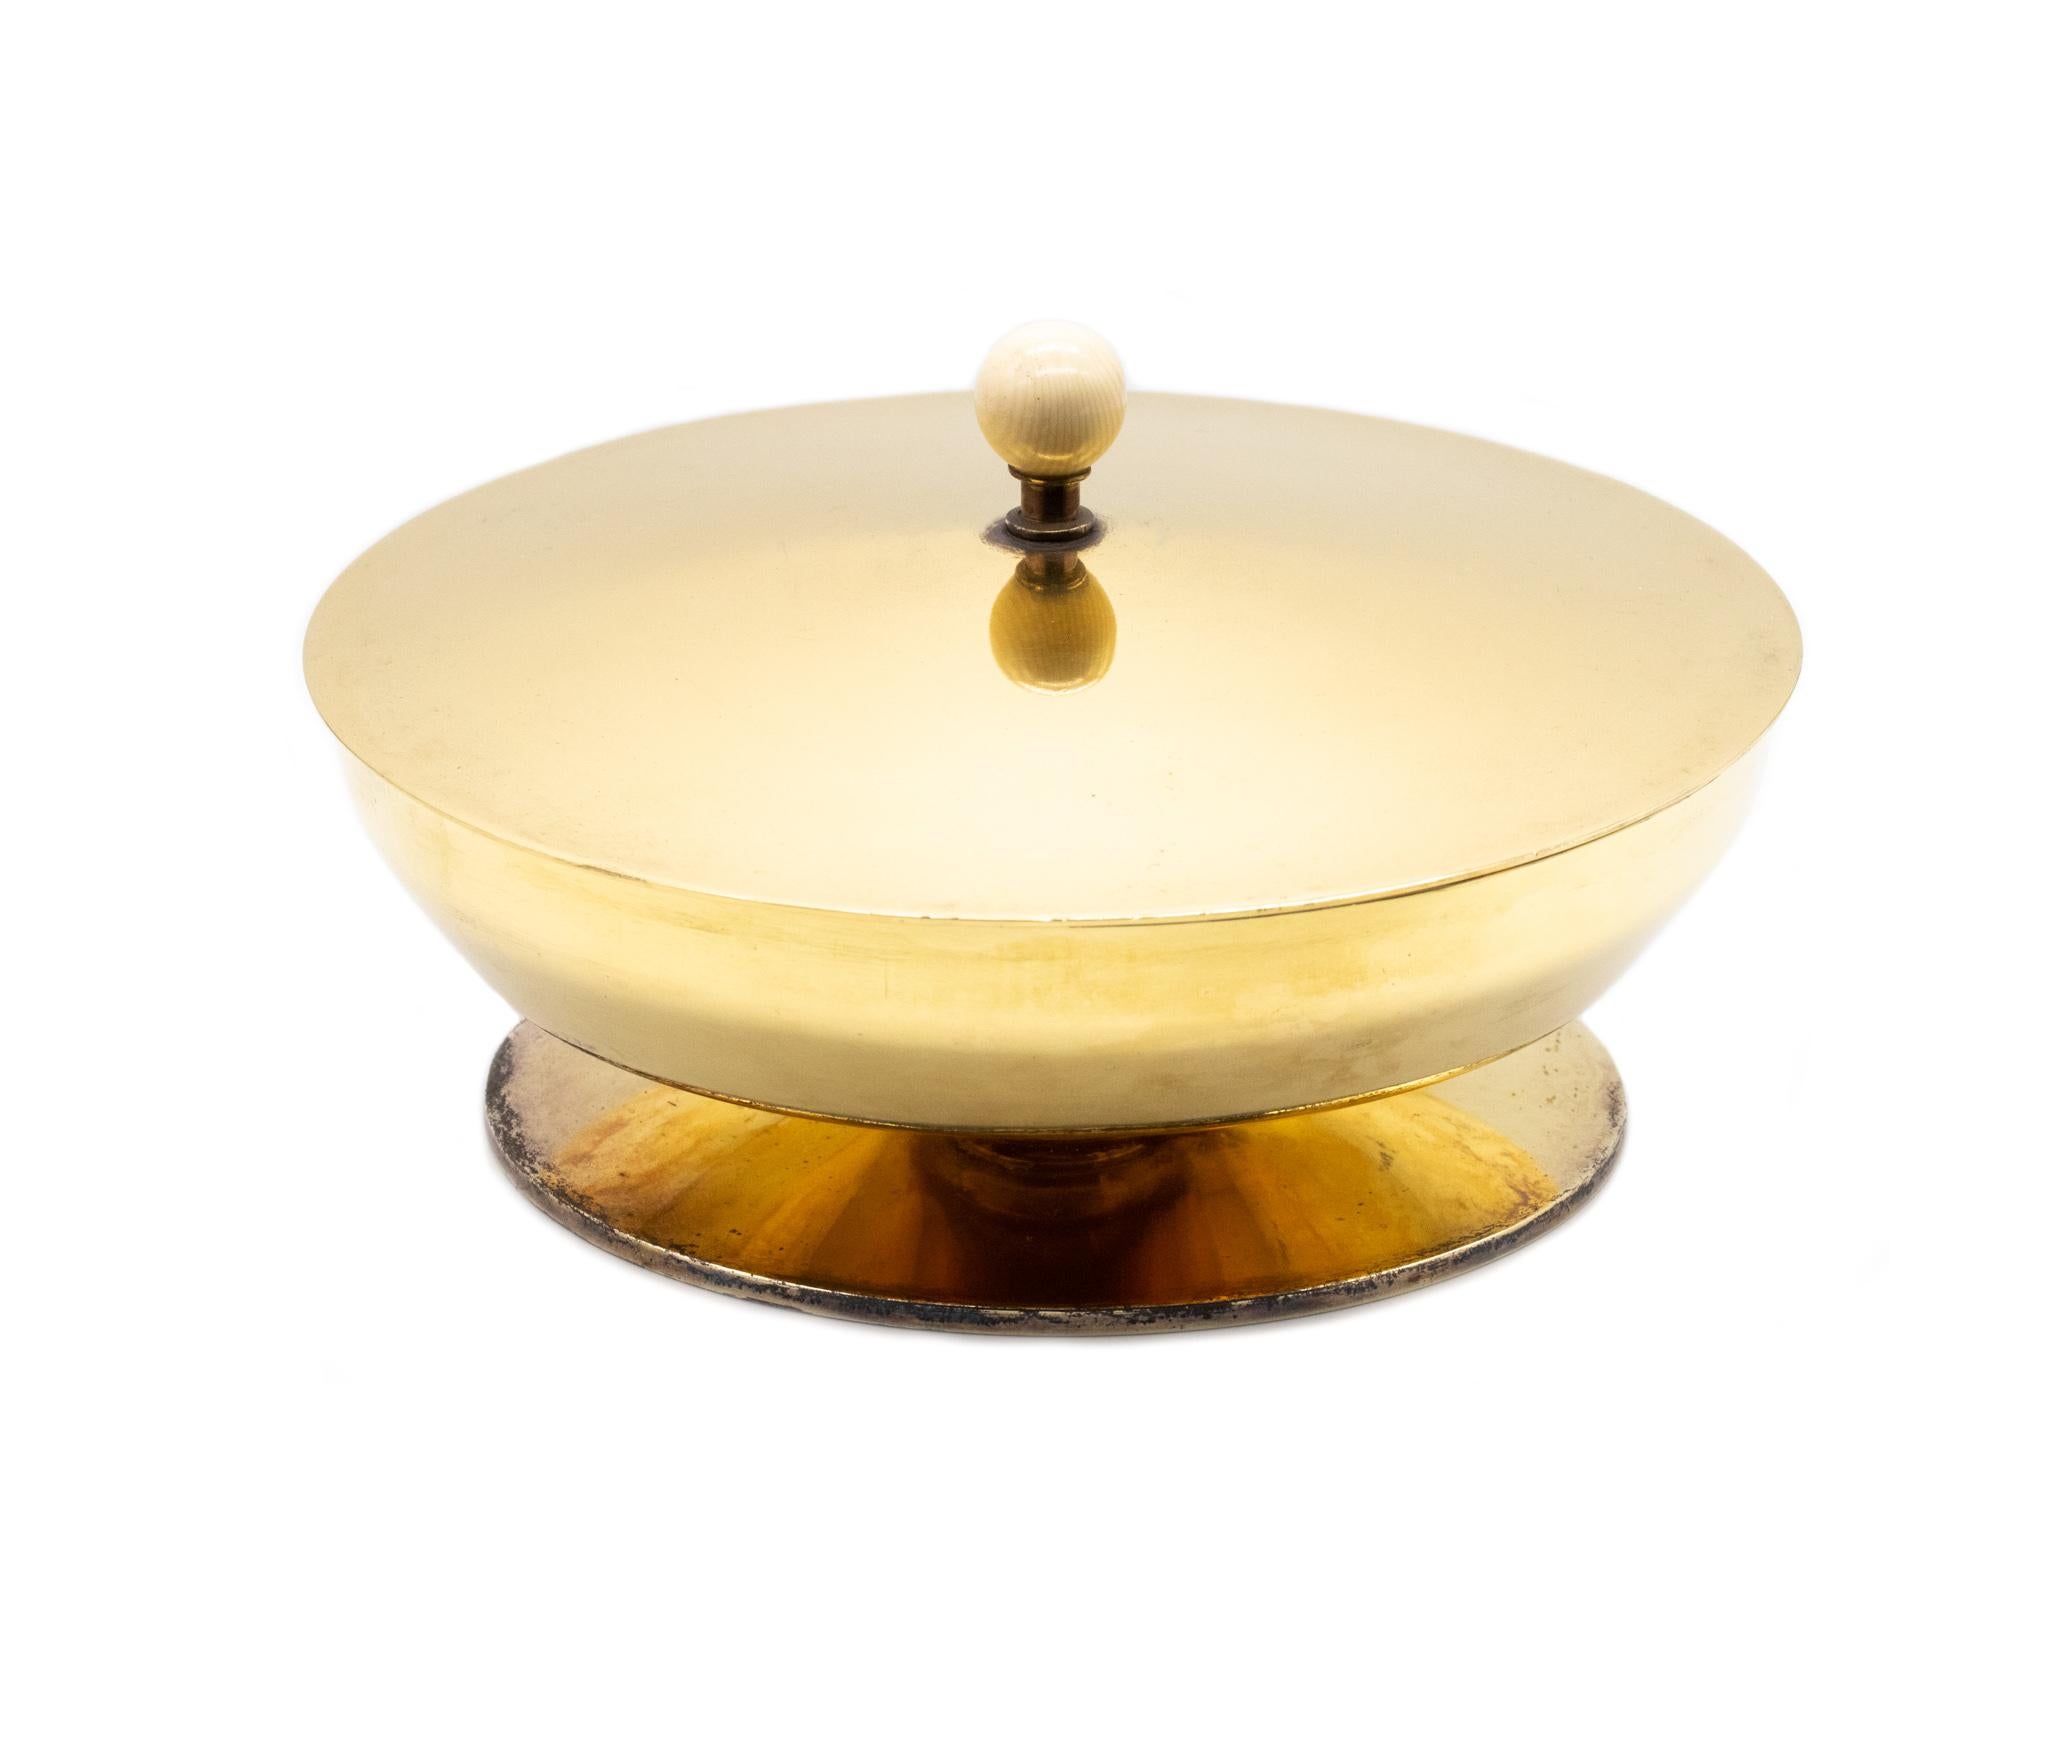 Mid-20th Century Art Deco 1930 Swiss Centerpiece Compote with Lid in Gilded .925 Sterling Silver For Sale